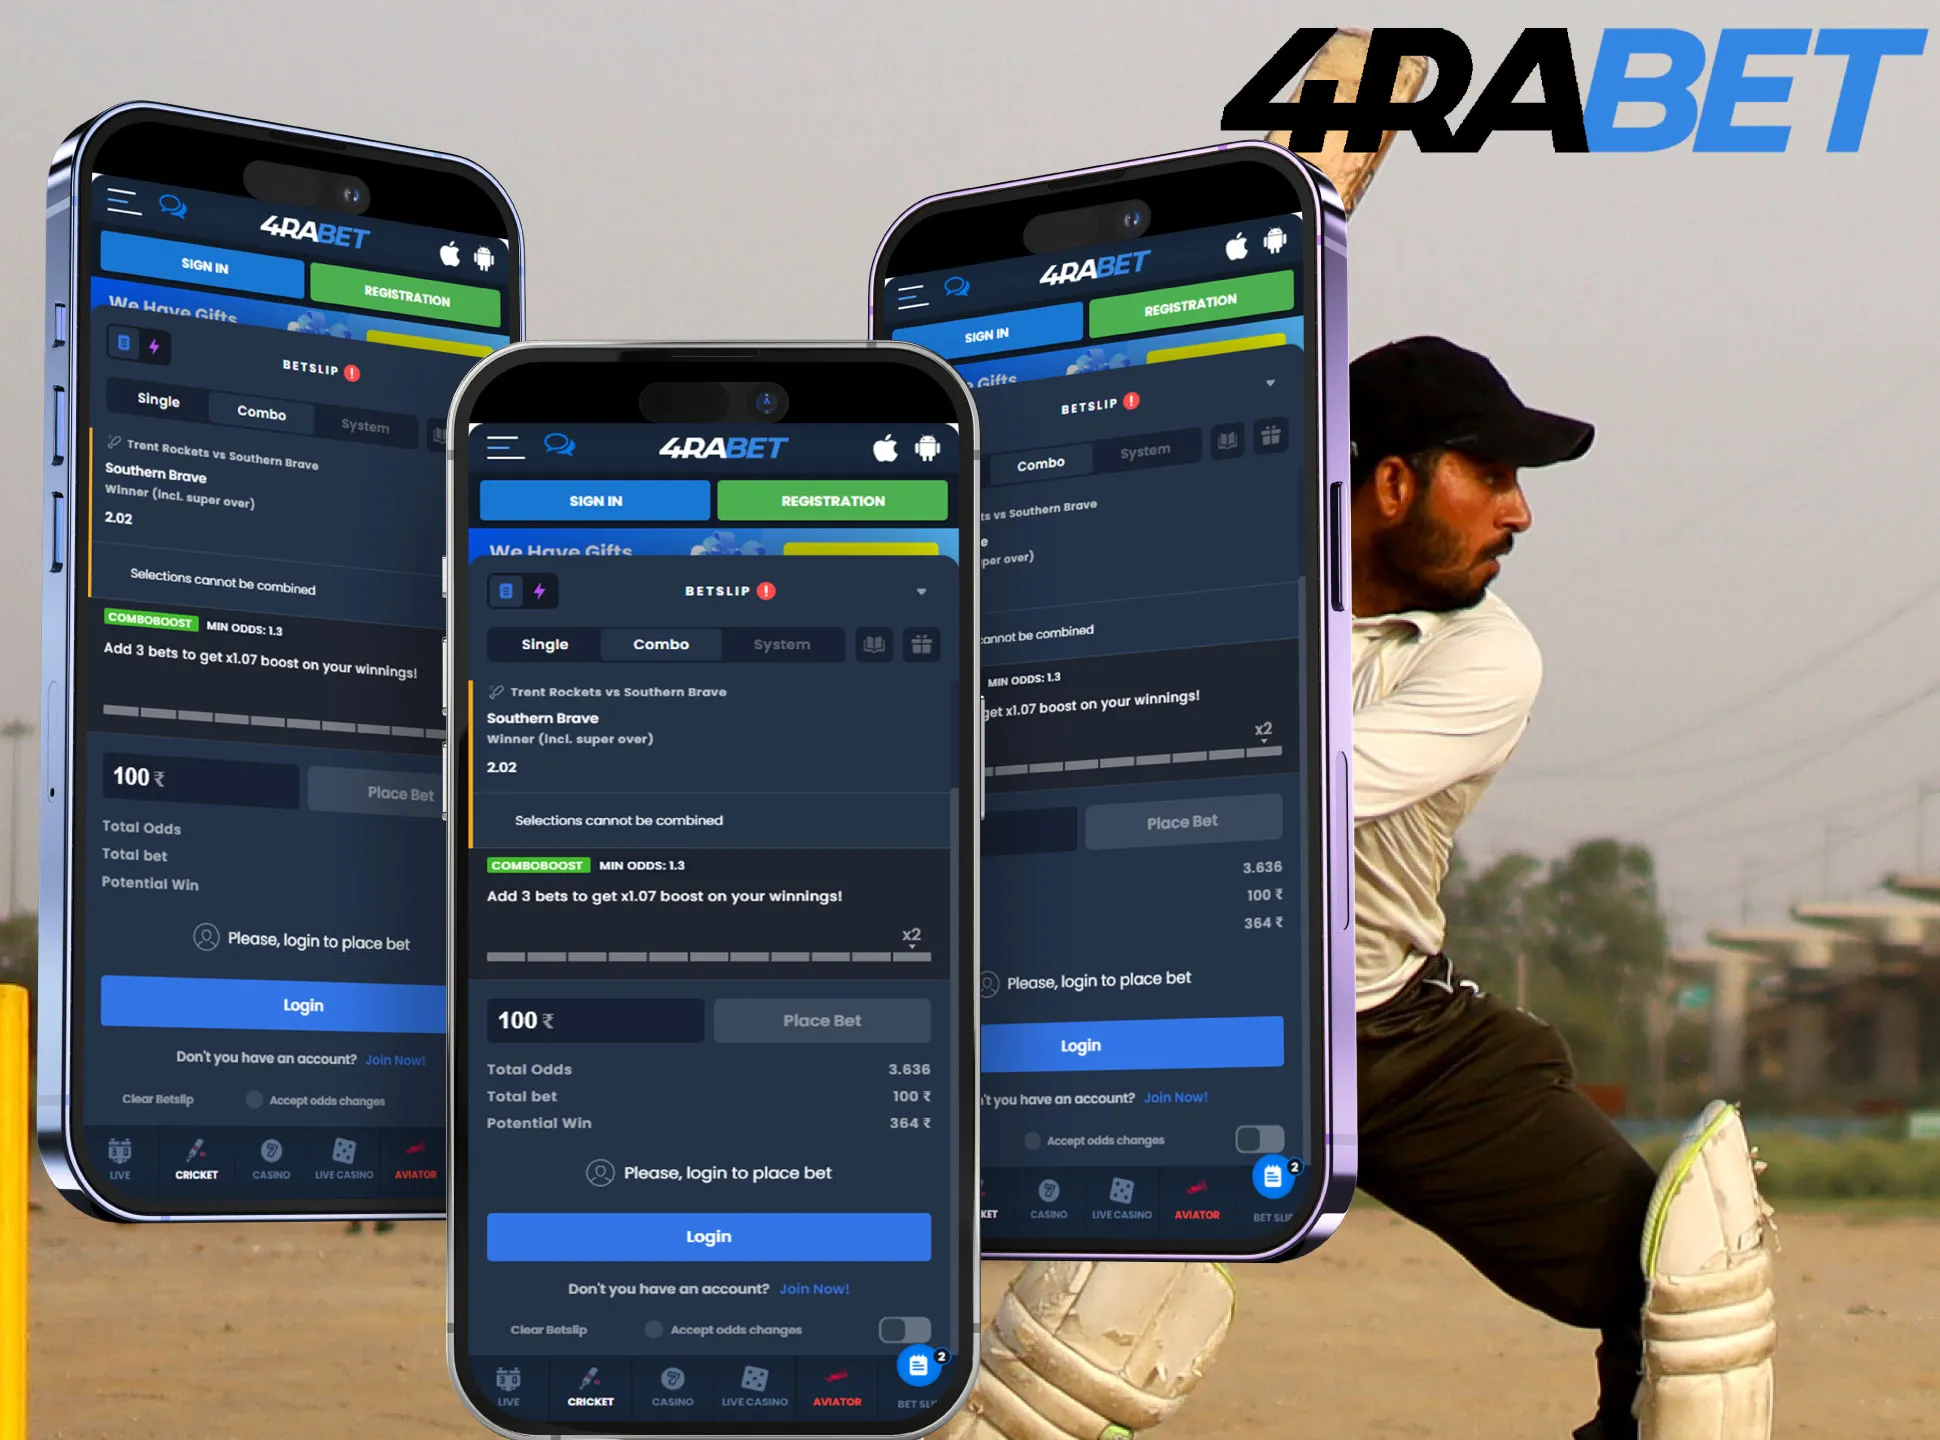 You can choose one of the various sports markets to bet on in the 4rabet app.